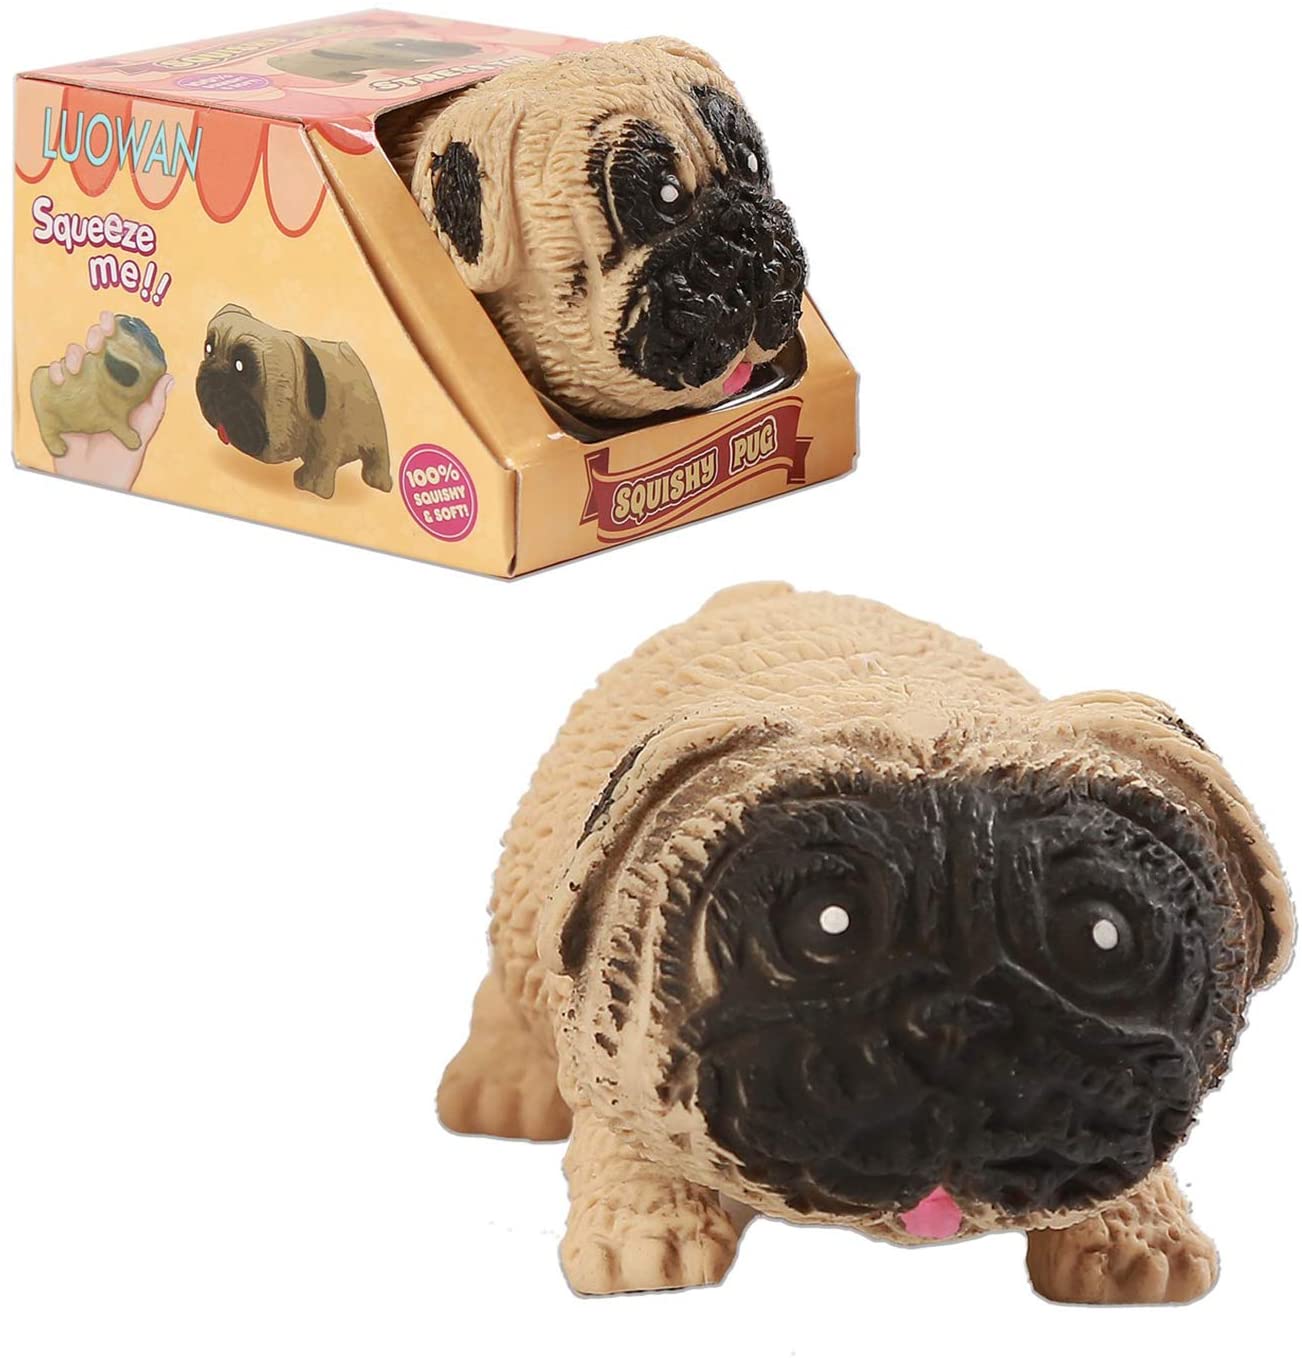 Early Spring Hot Sale 48% OFF - Squishy Pug Dog(BUY 2 GET EXTRA 10% OFF NOW)